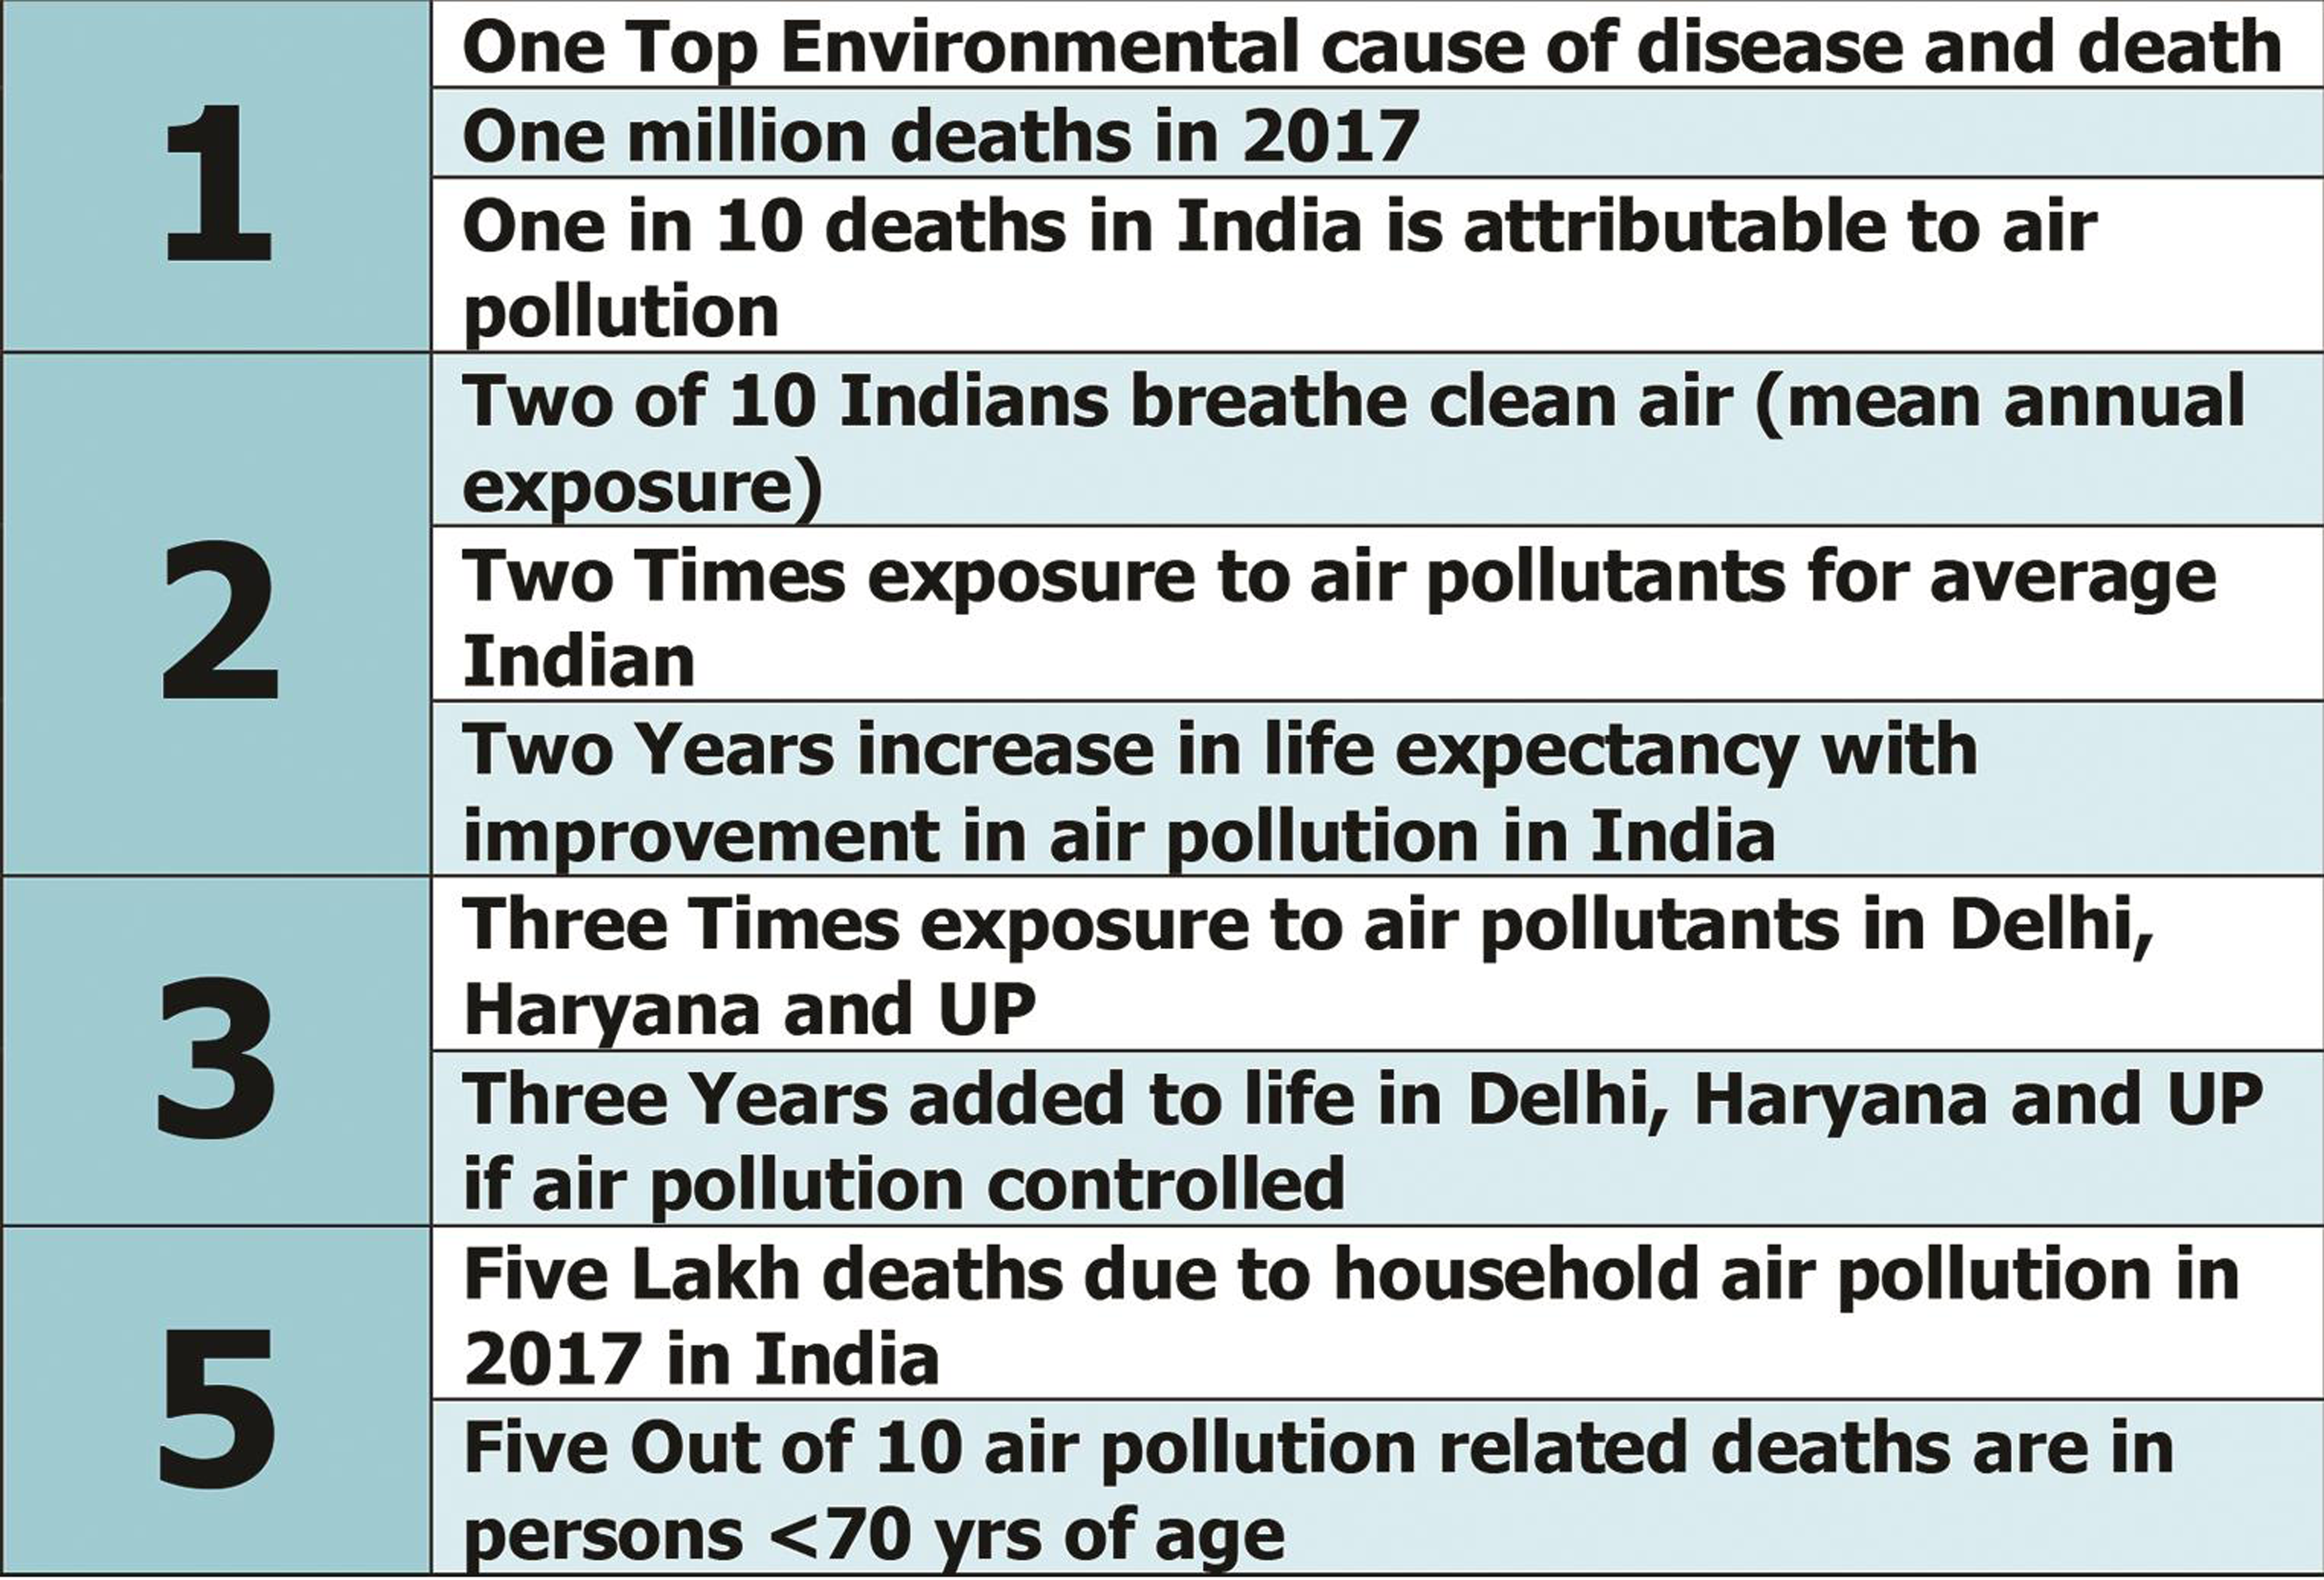 Air pollution in India: current status.